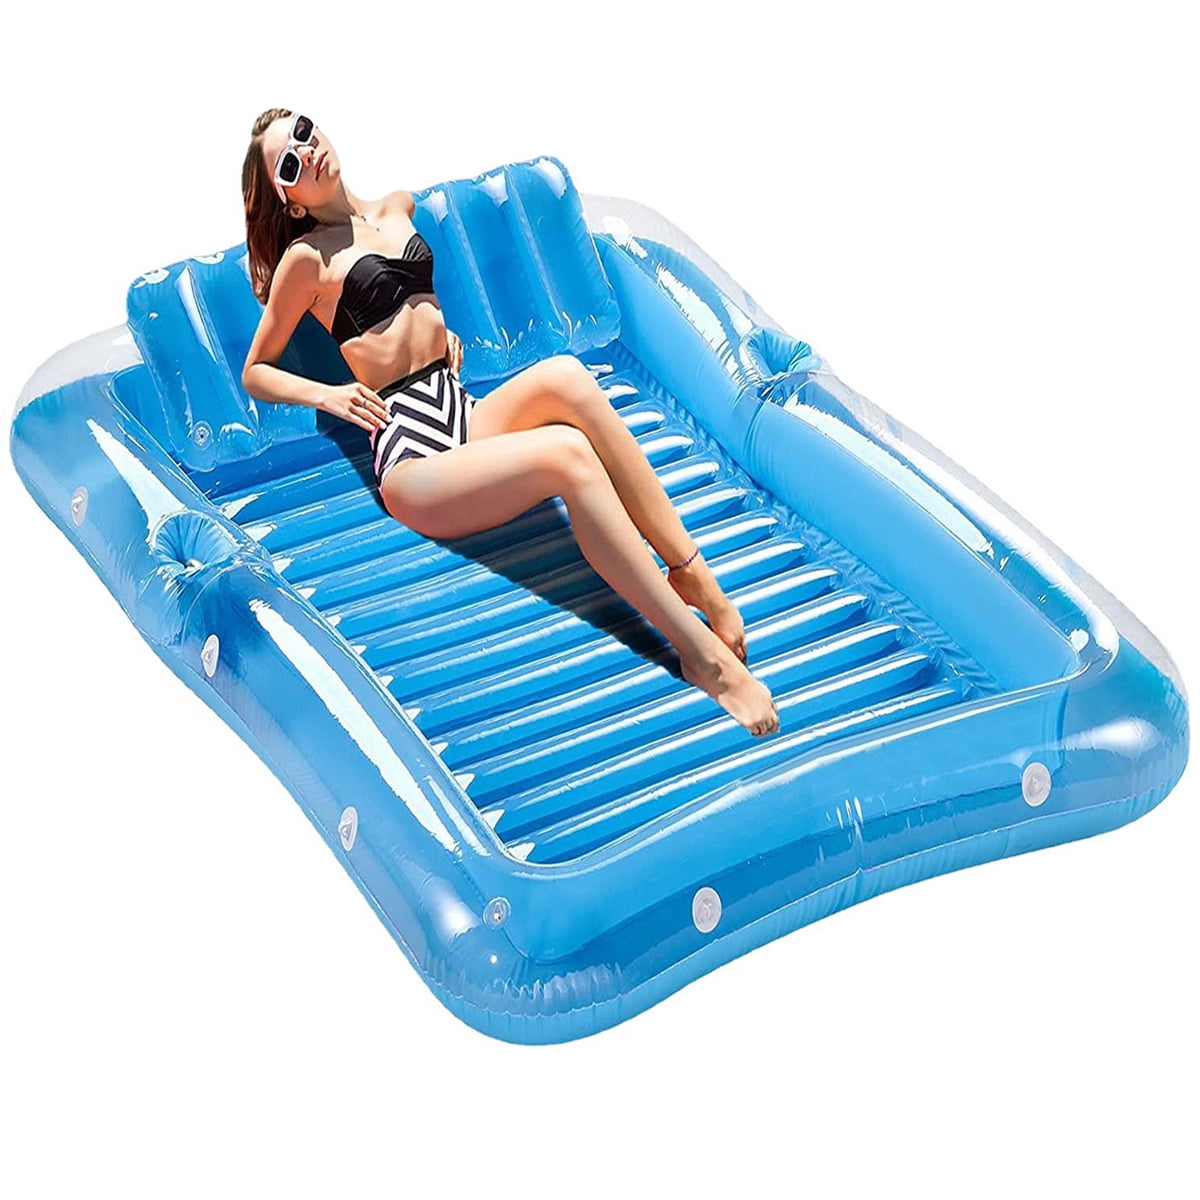 Inflatable Tanning Pool Lounger Float Jasonwell 4 in 1 Sun Tan Tub Sunbathing Pool Lounge Raft Floatie Toys Water Filled Tanning Bed Mat Pad for Adult Blow Up Kiddie Pool Kids Ball Pit Pool 